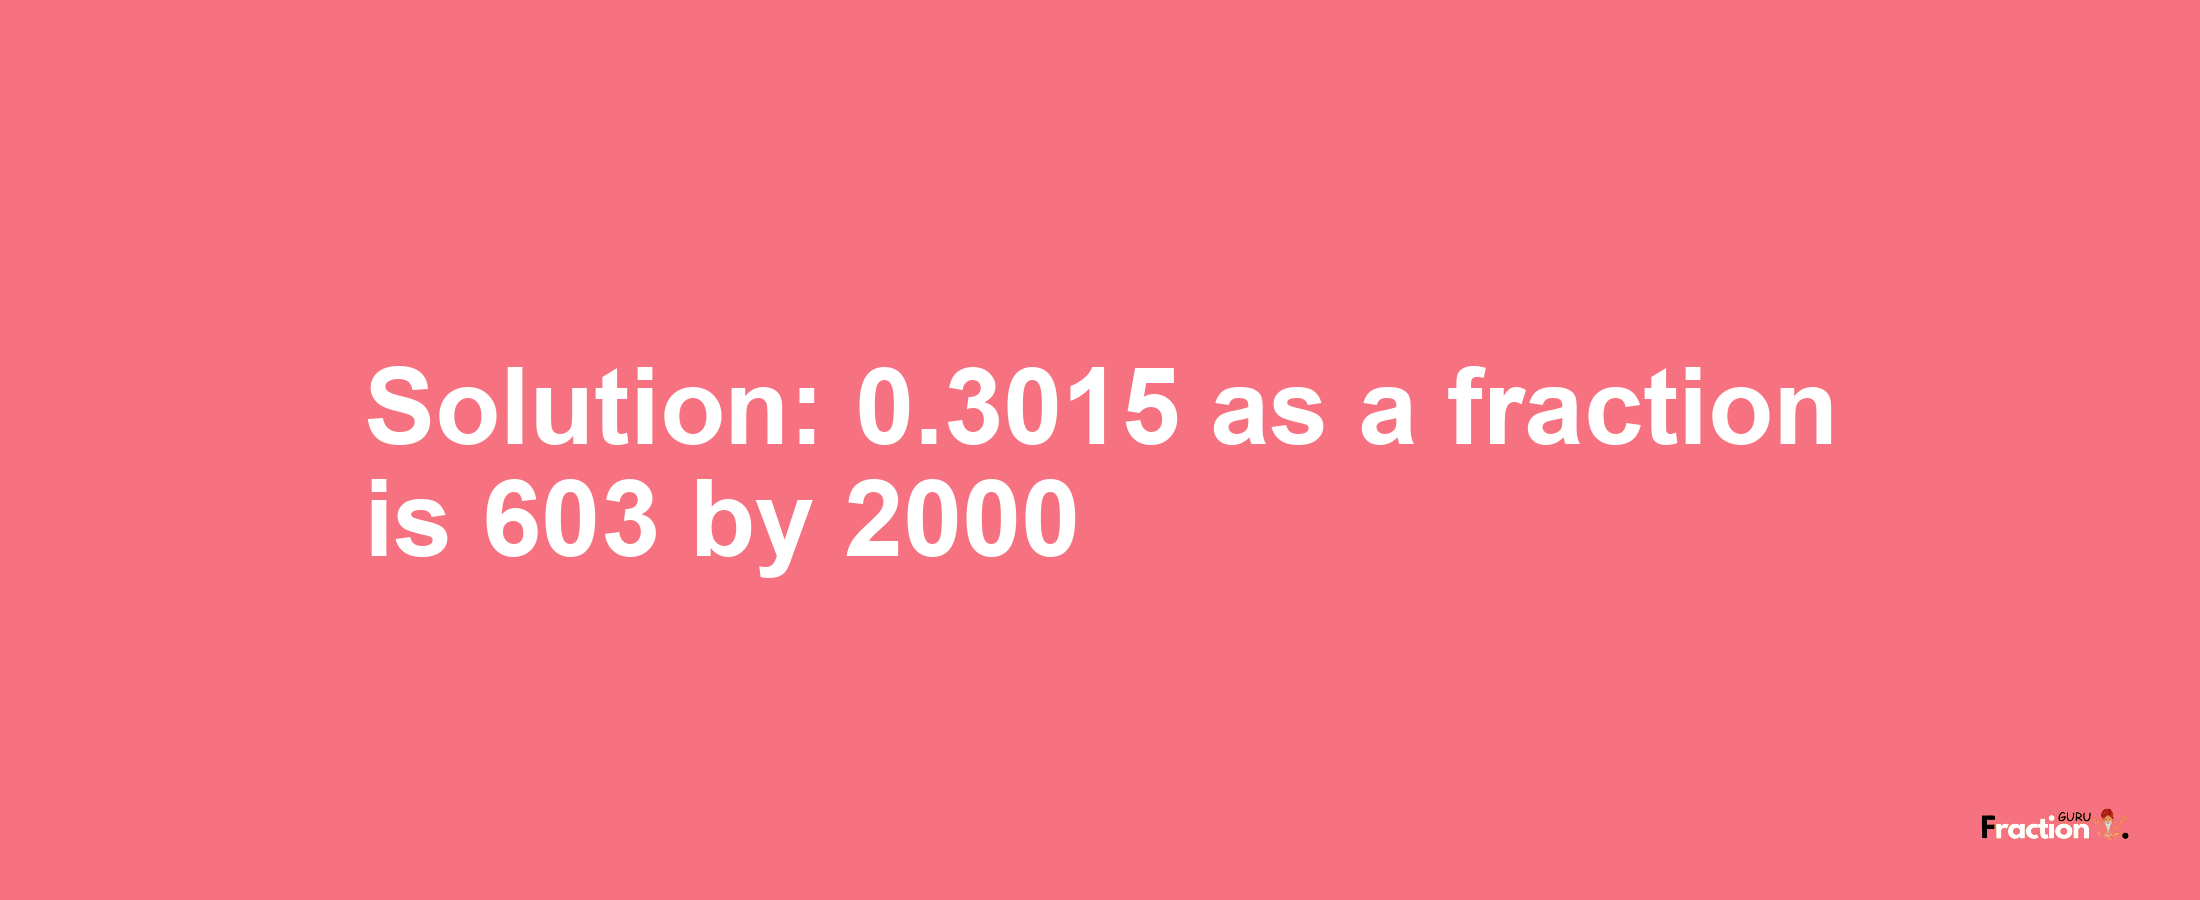 Solution:0.3015 as a fraction is 603/2000